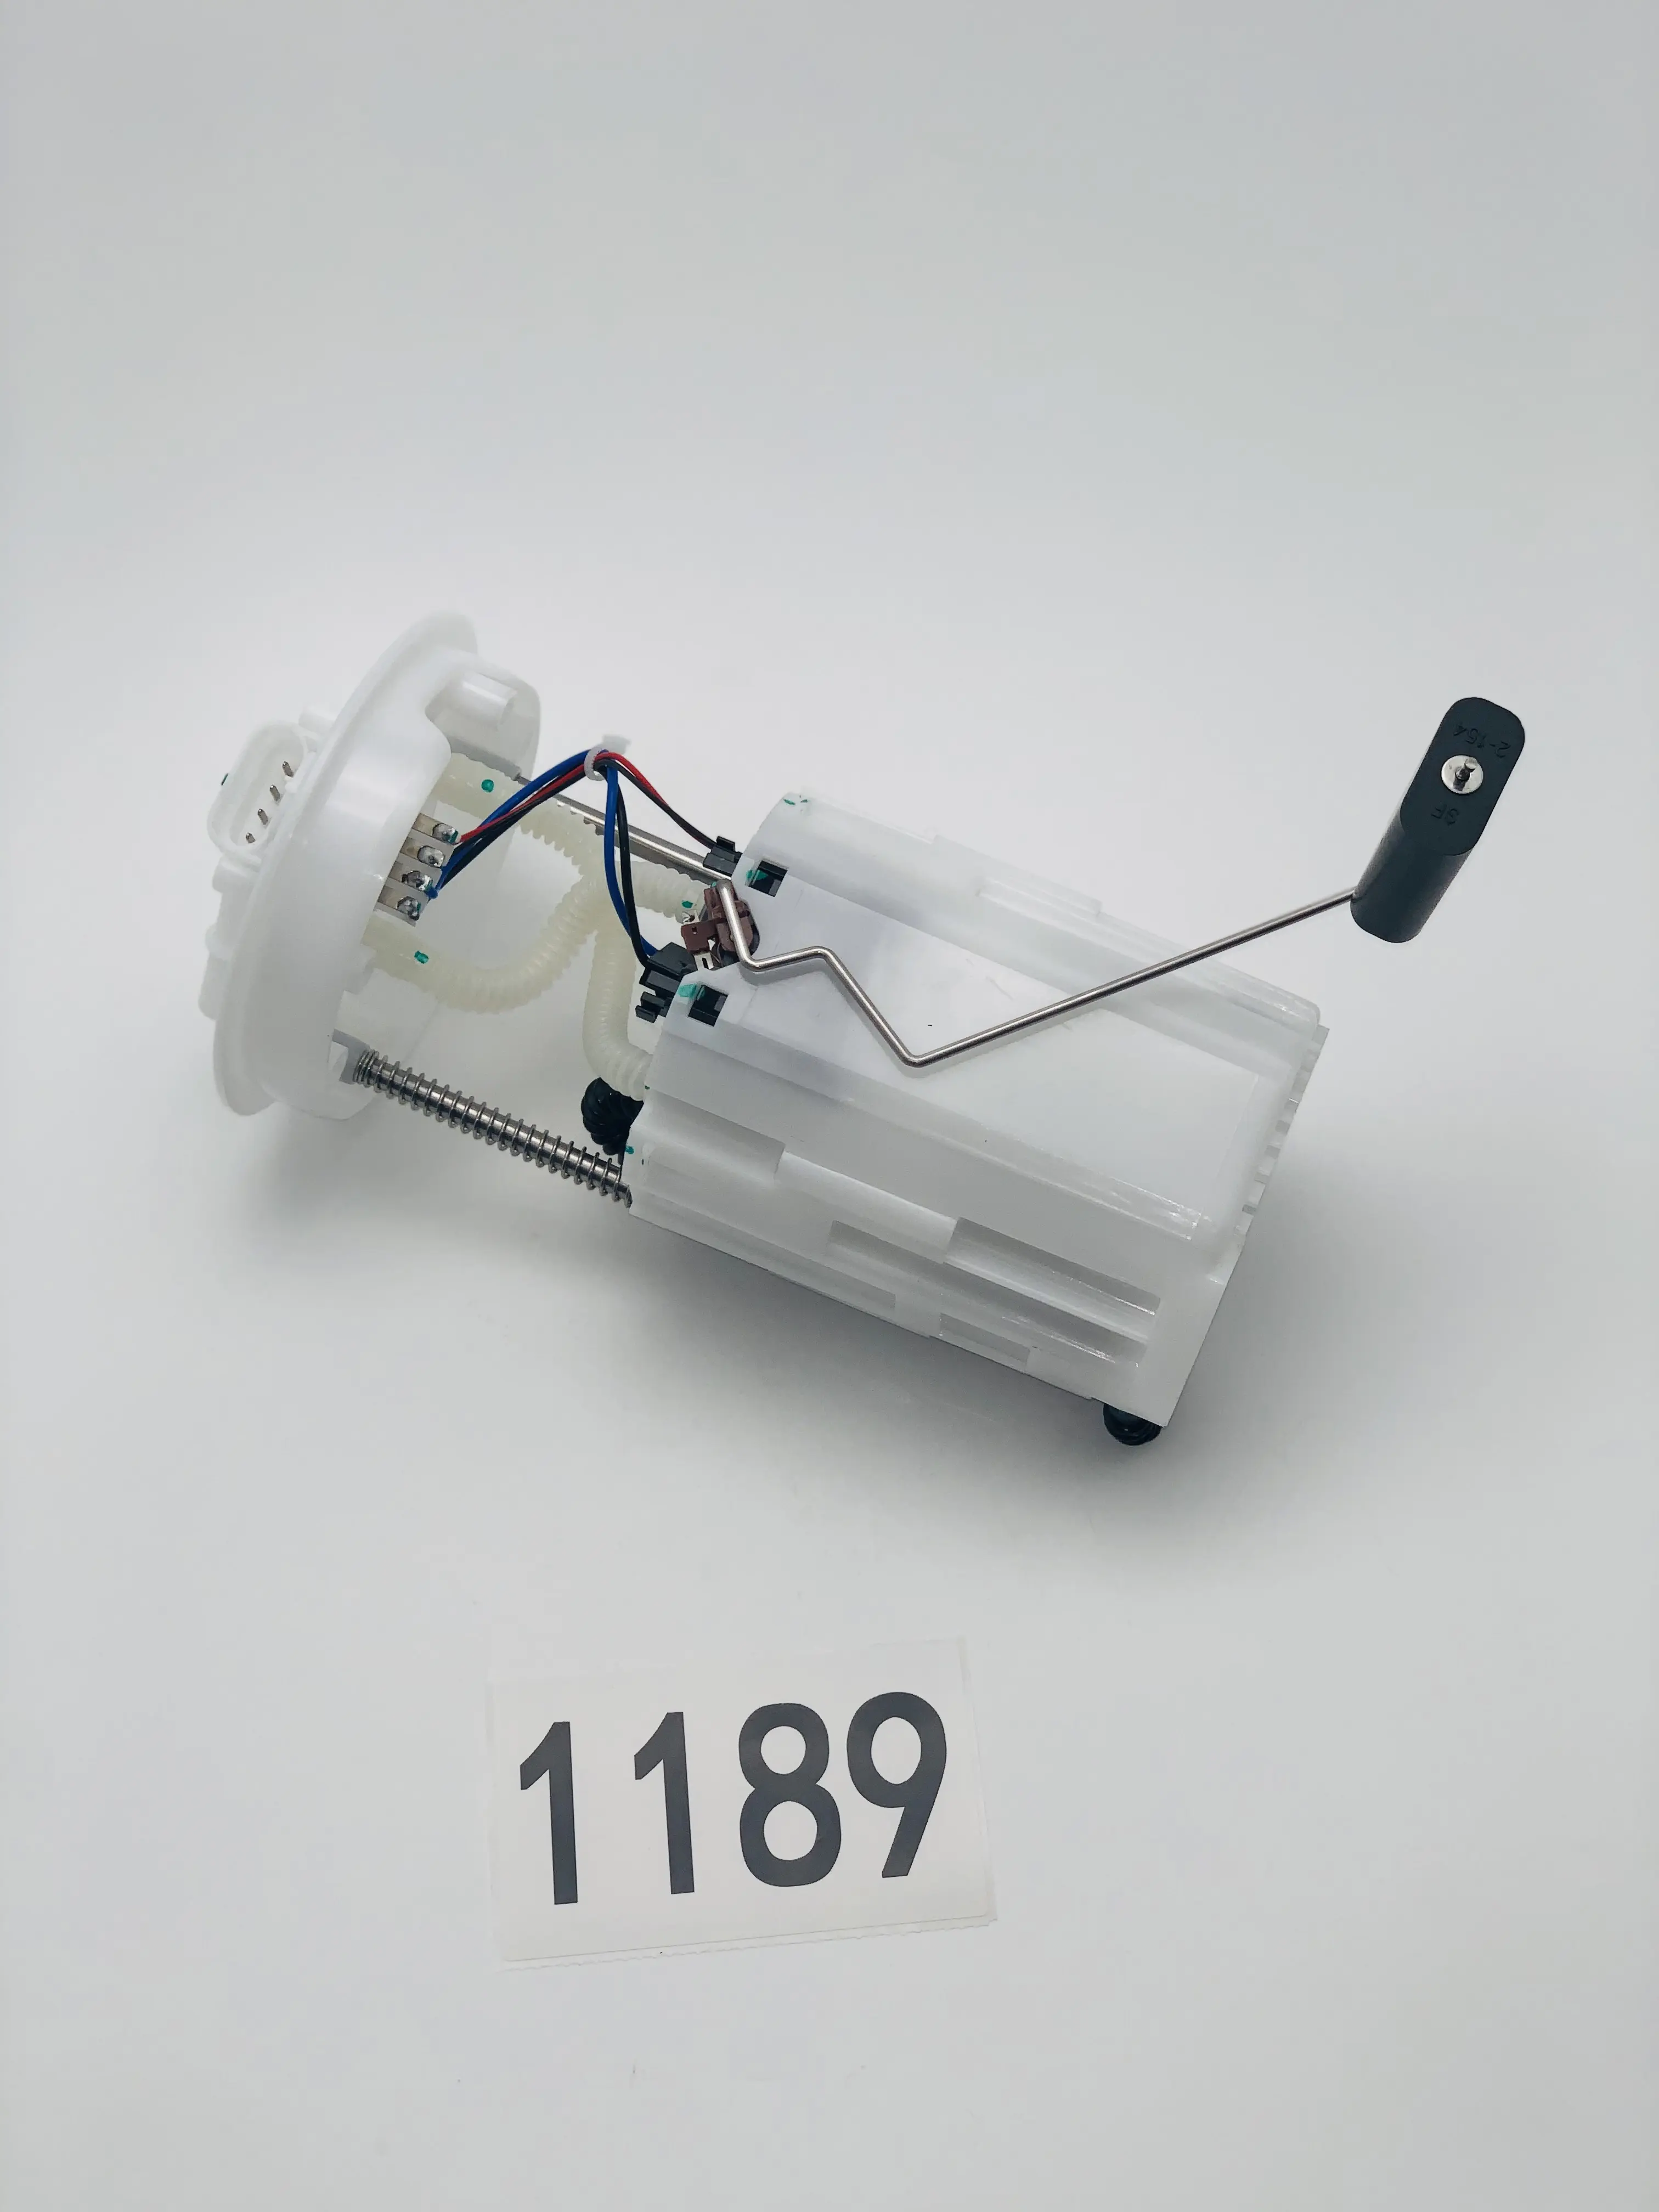 KS-A1189 HIGH Quality Fuel Pump Assembly for Geely EMGRAND new EC7